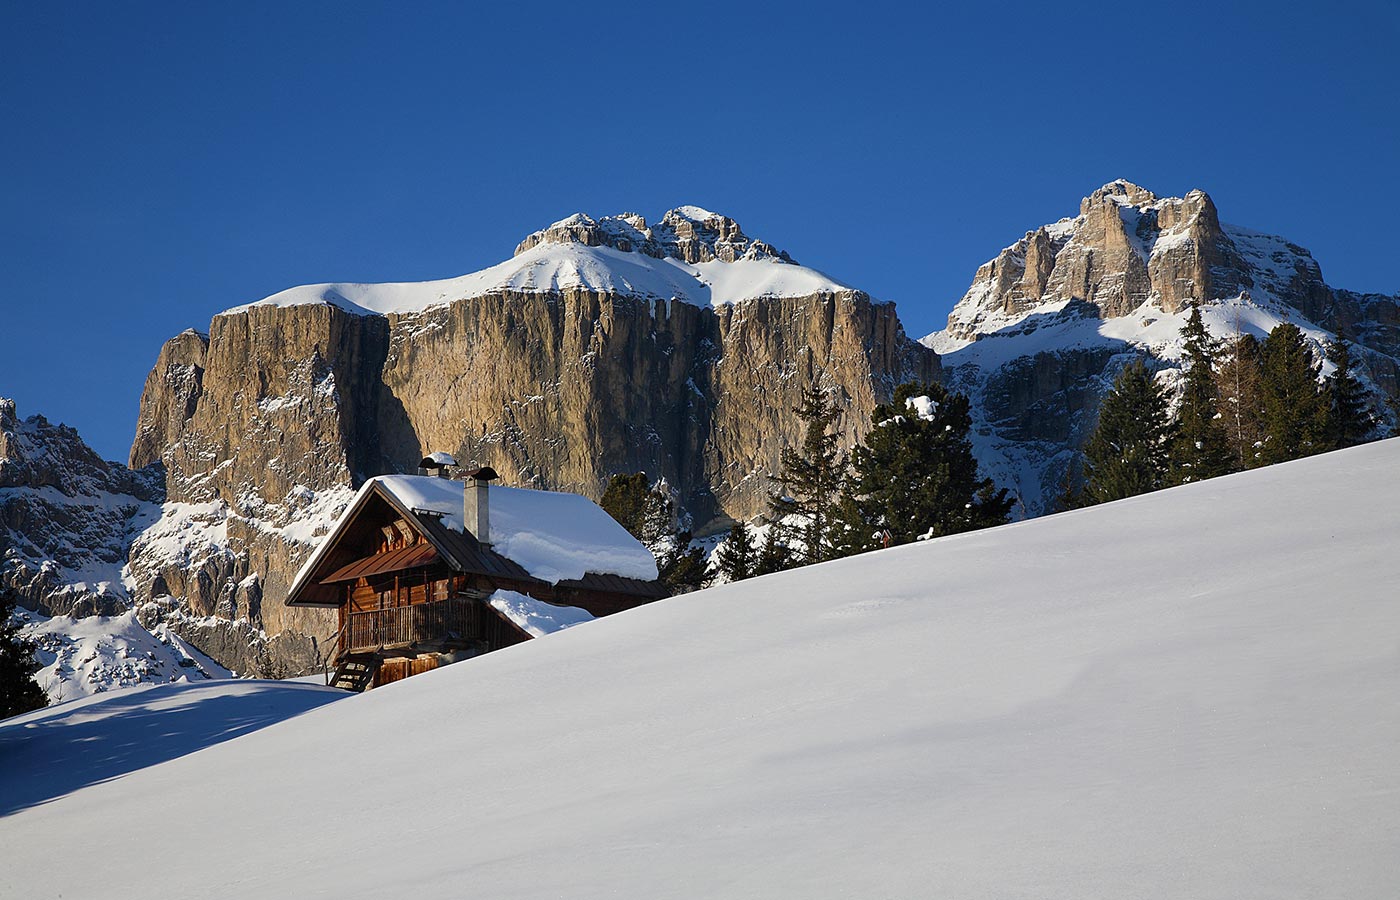 Typical wooden house on a snowy mountain